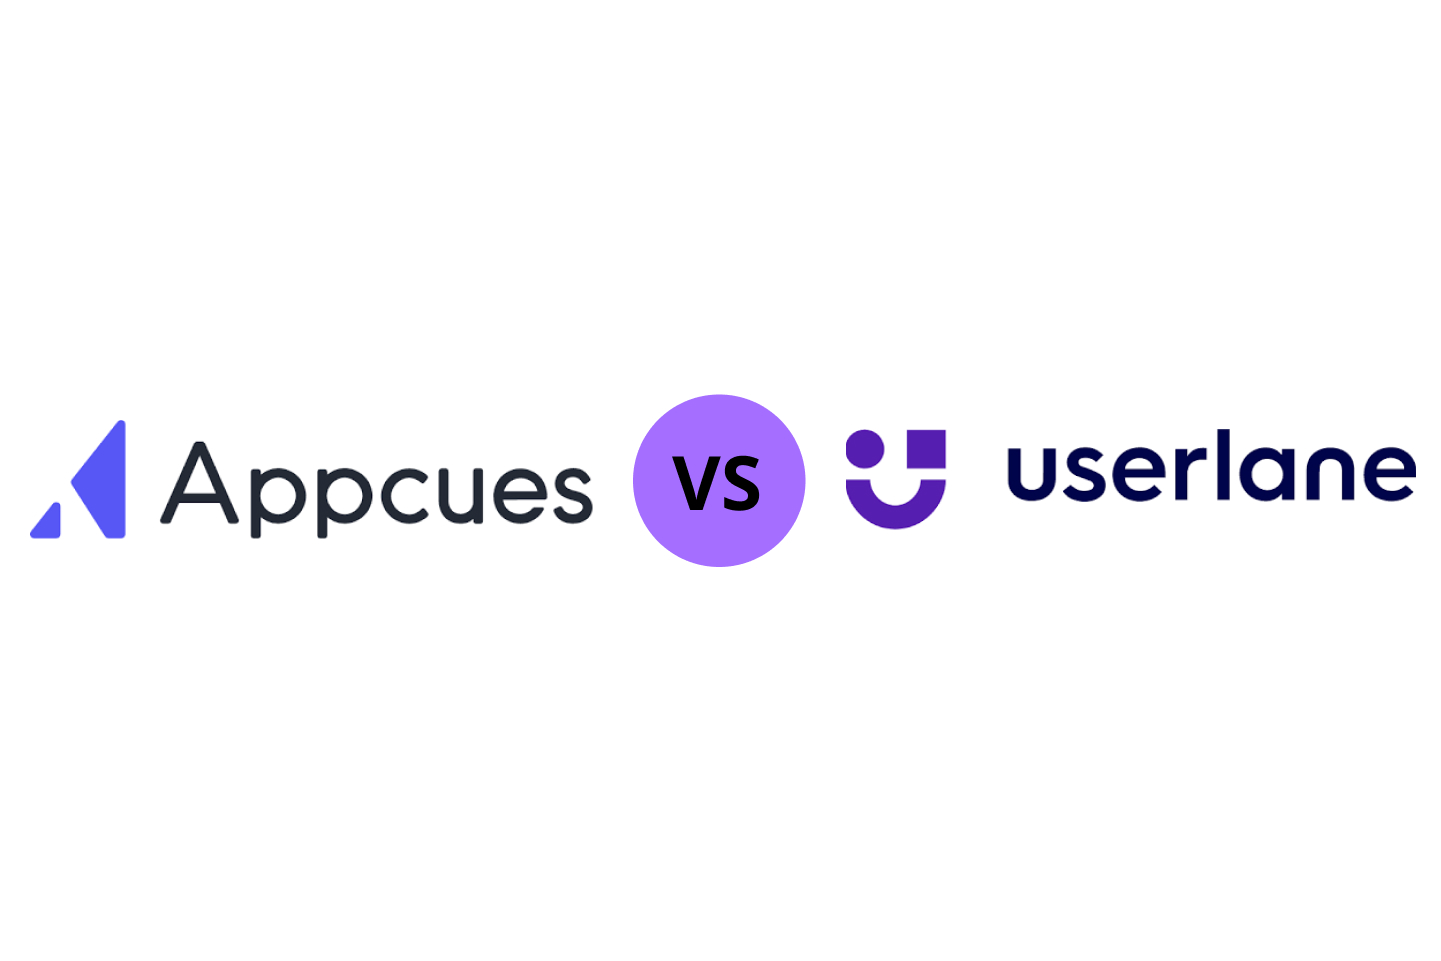 Appcues vs Userlane: One Is Better for 2022